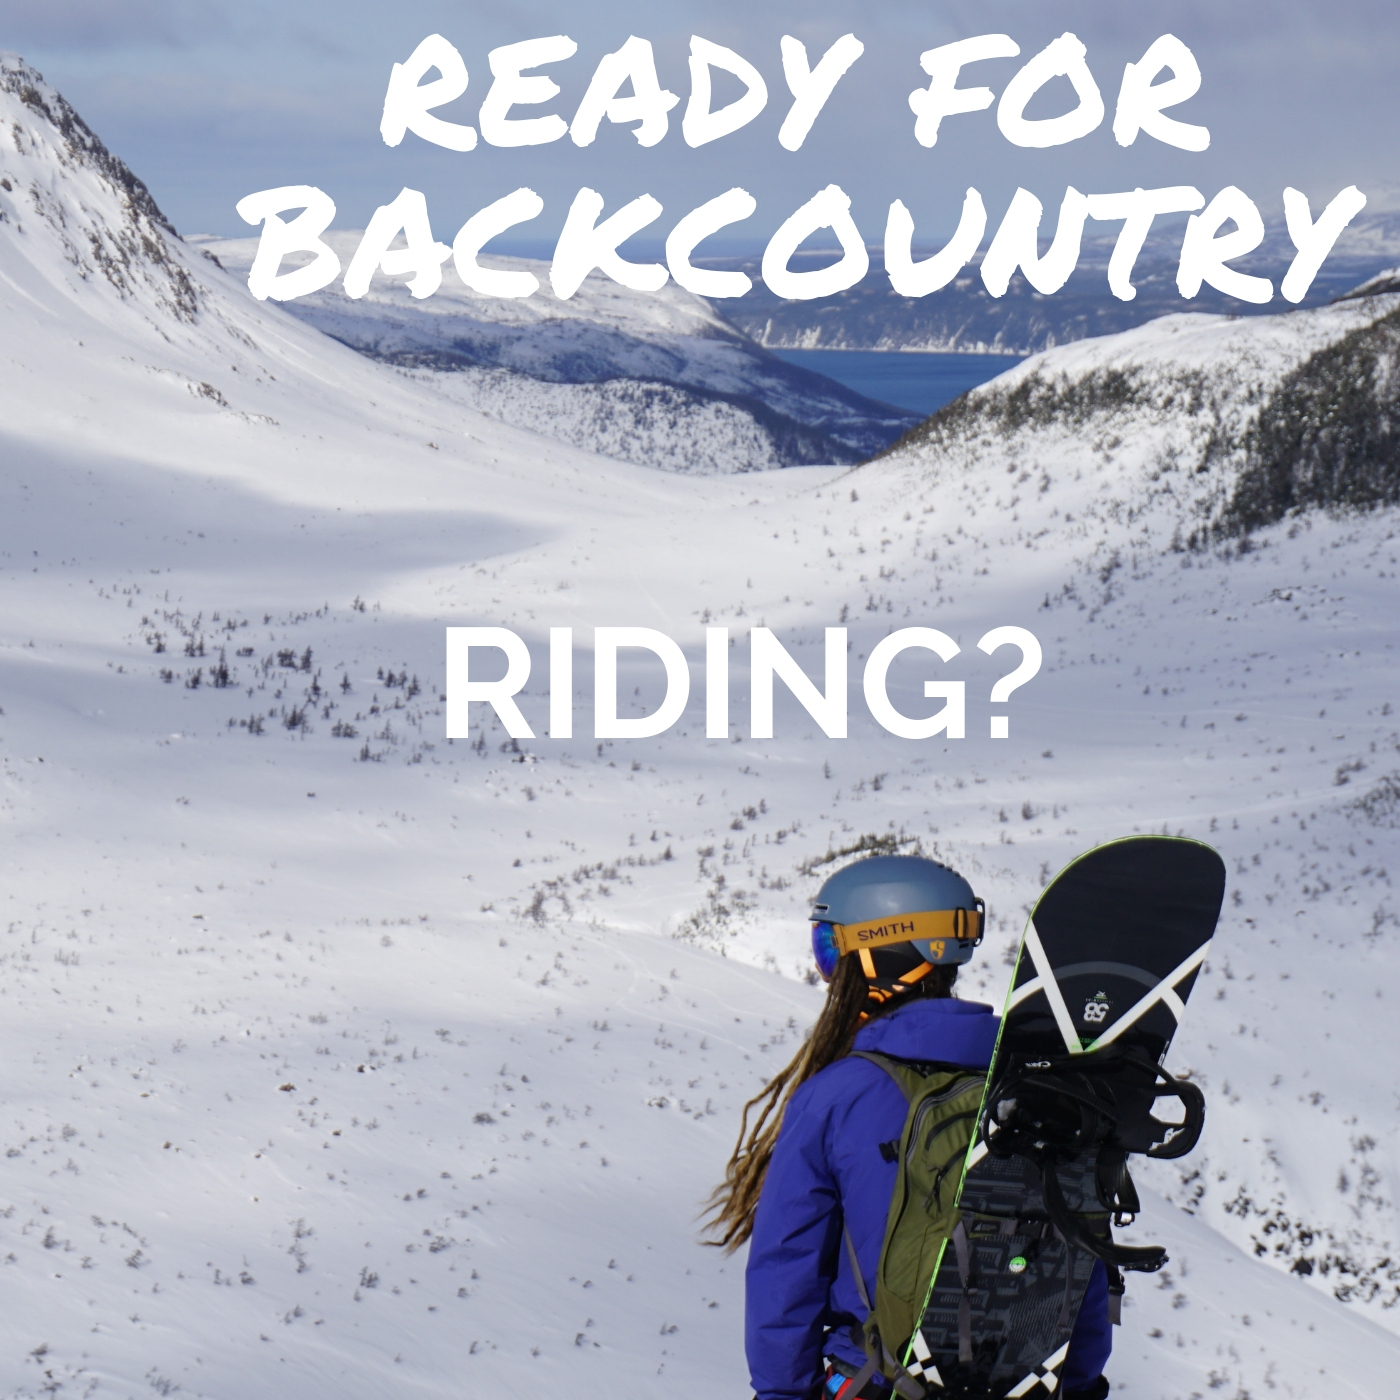 Ready for Backcountry riding, backcountry snowboarding Newfoundland, Tablelands, Gros Morne, Wildly Intrepid